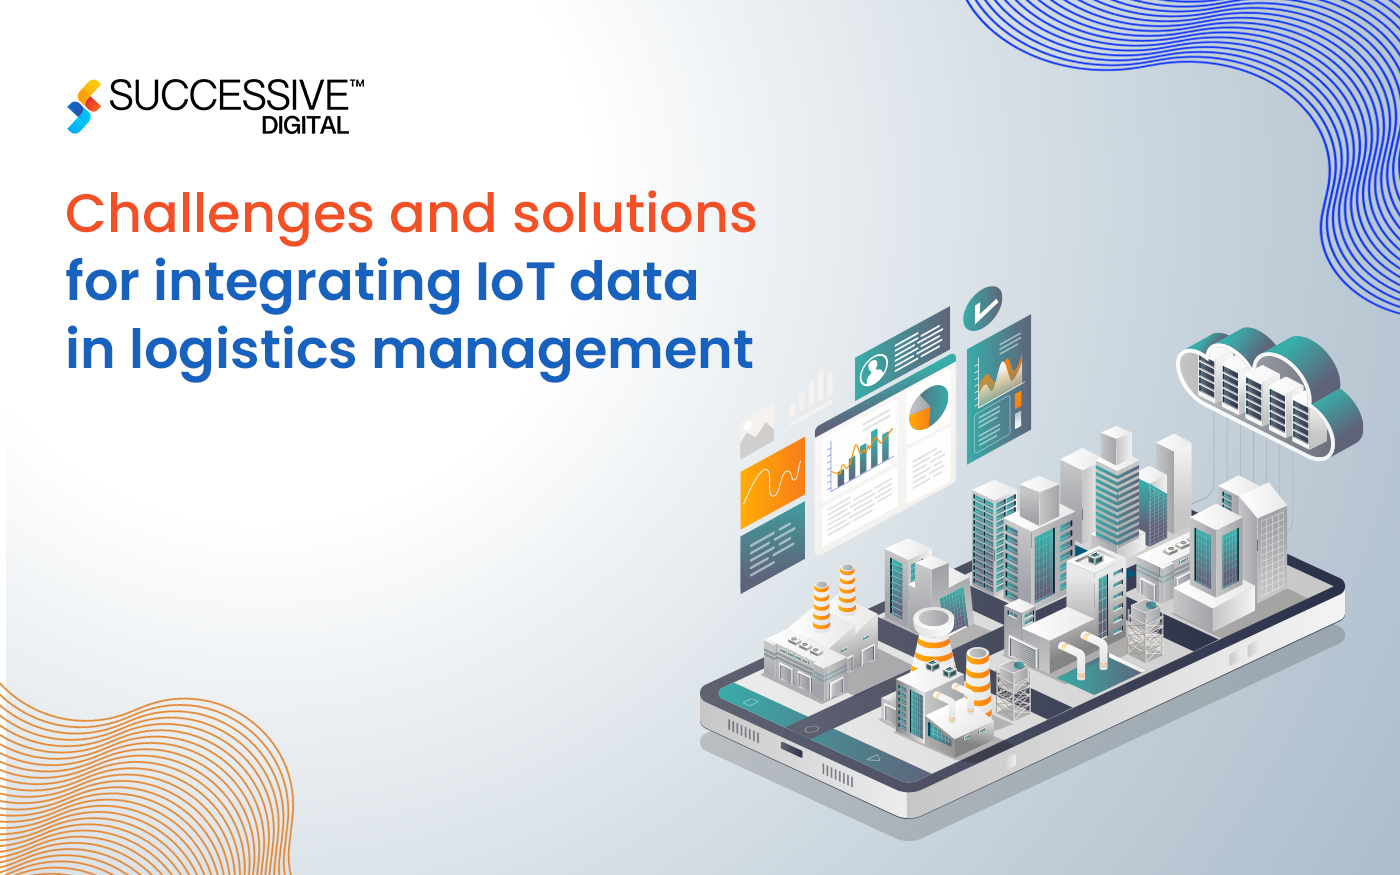 What are the Challenges and Solutions for Integrating IoT Data in Logistics Management?